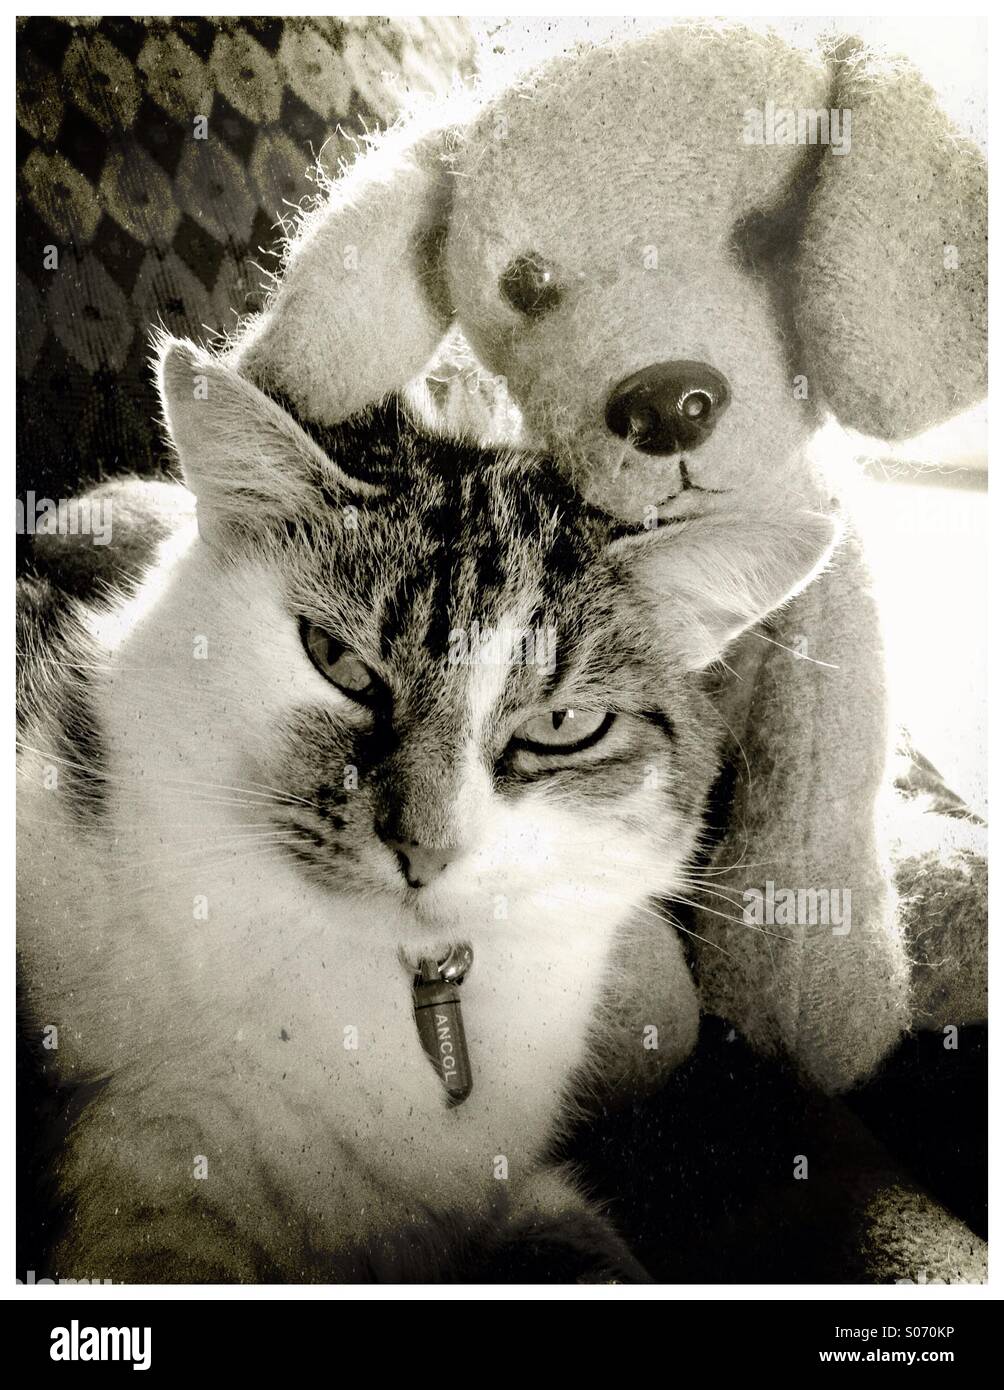 Furry Friends. Cat and toy dog. Stock Photo